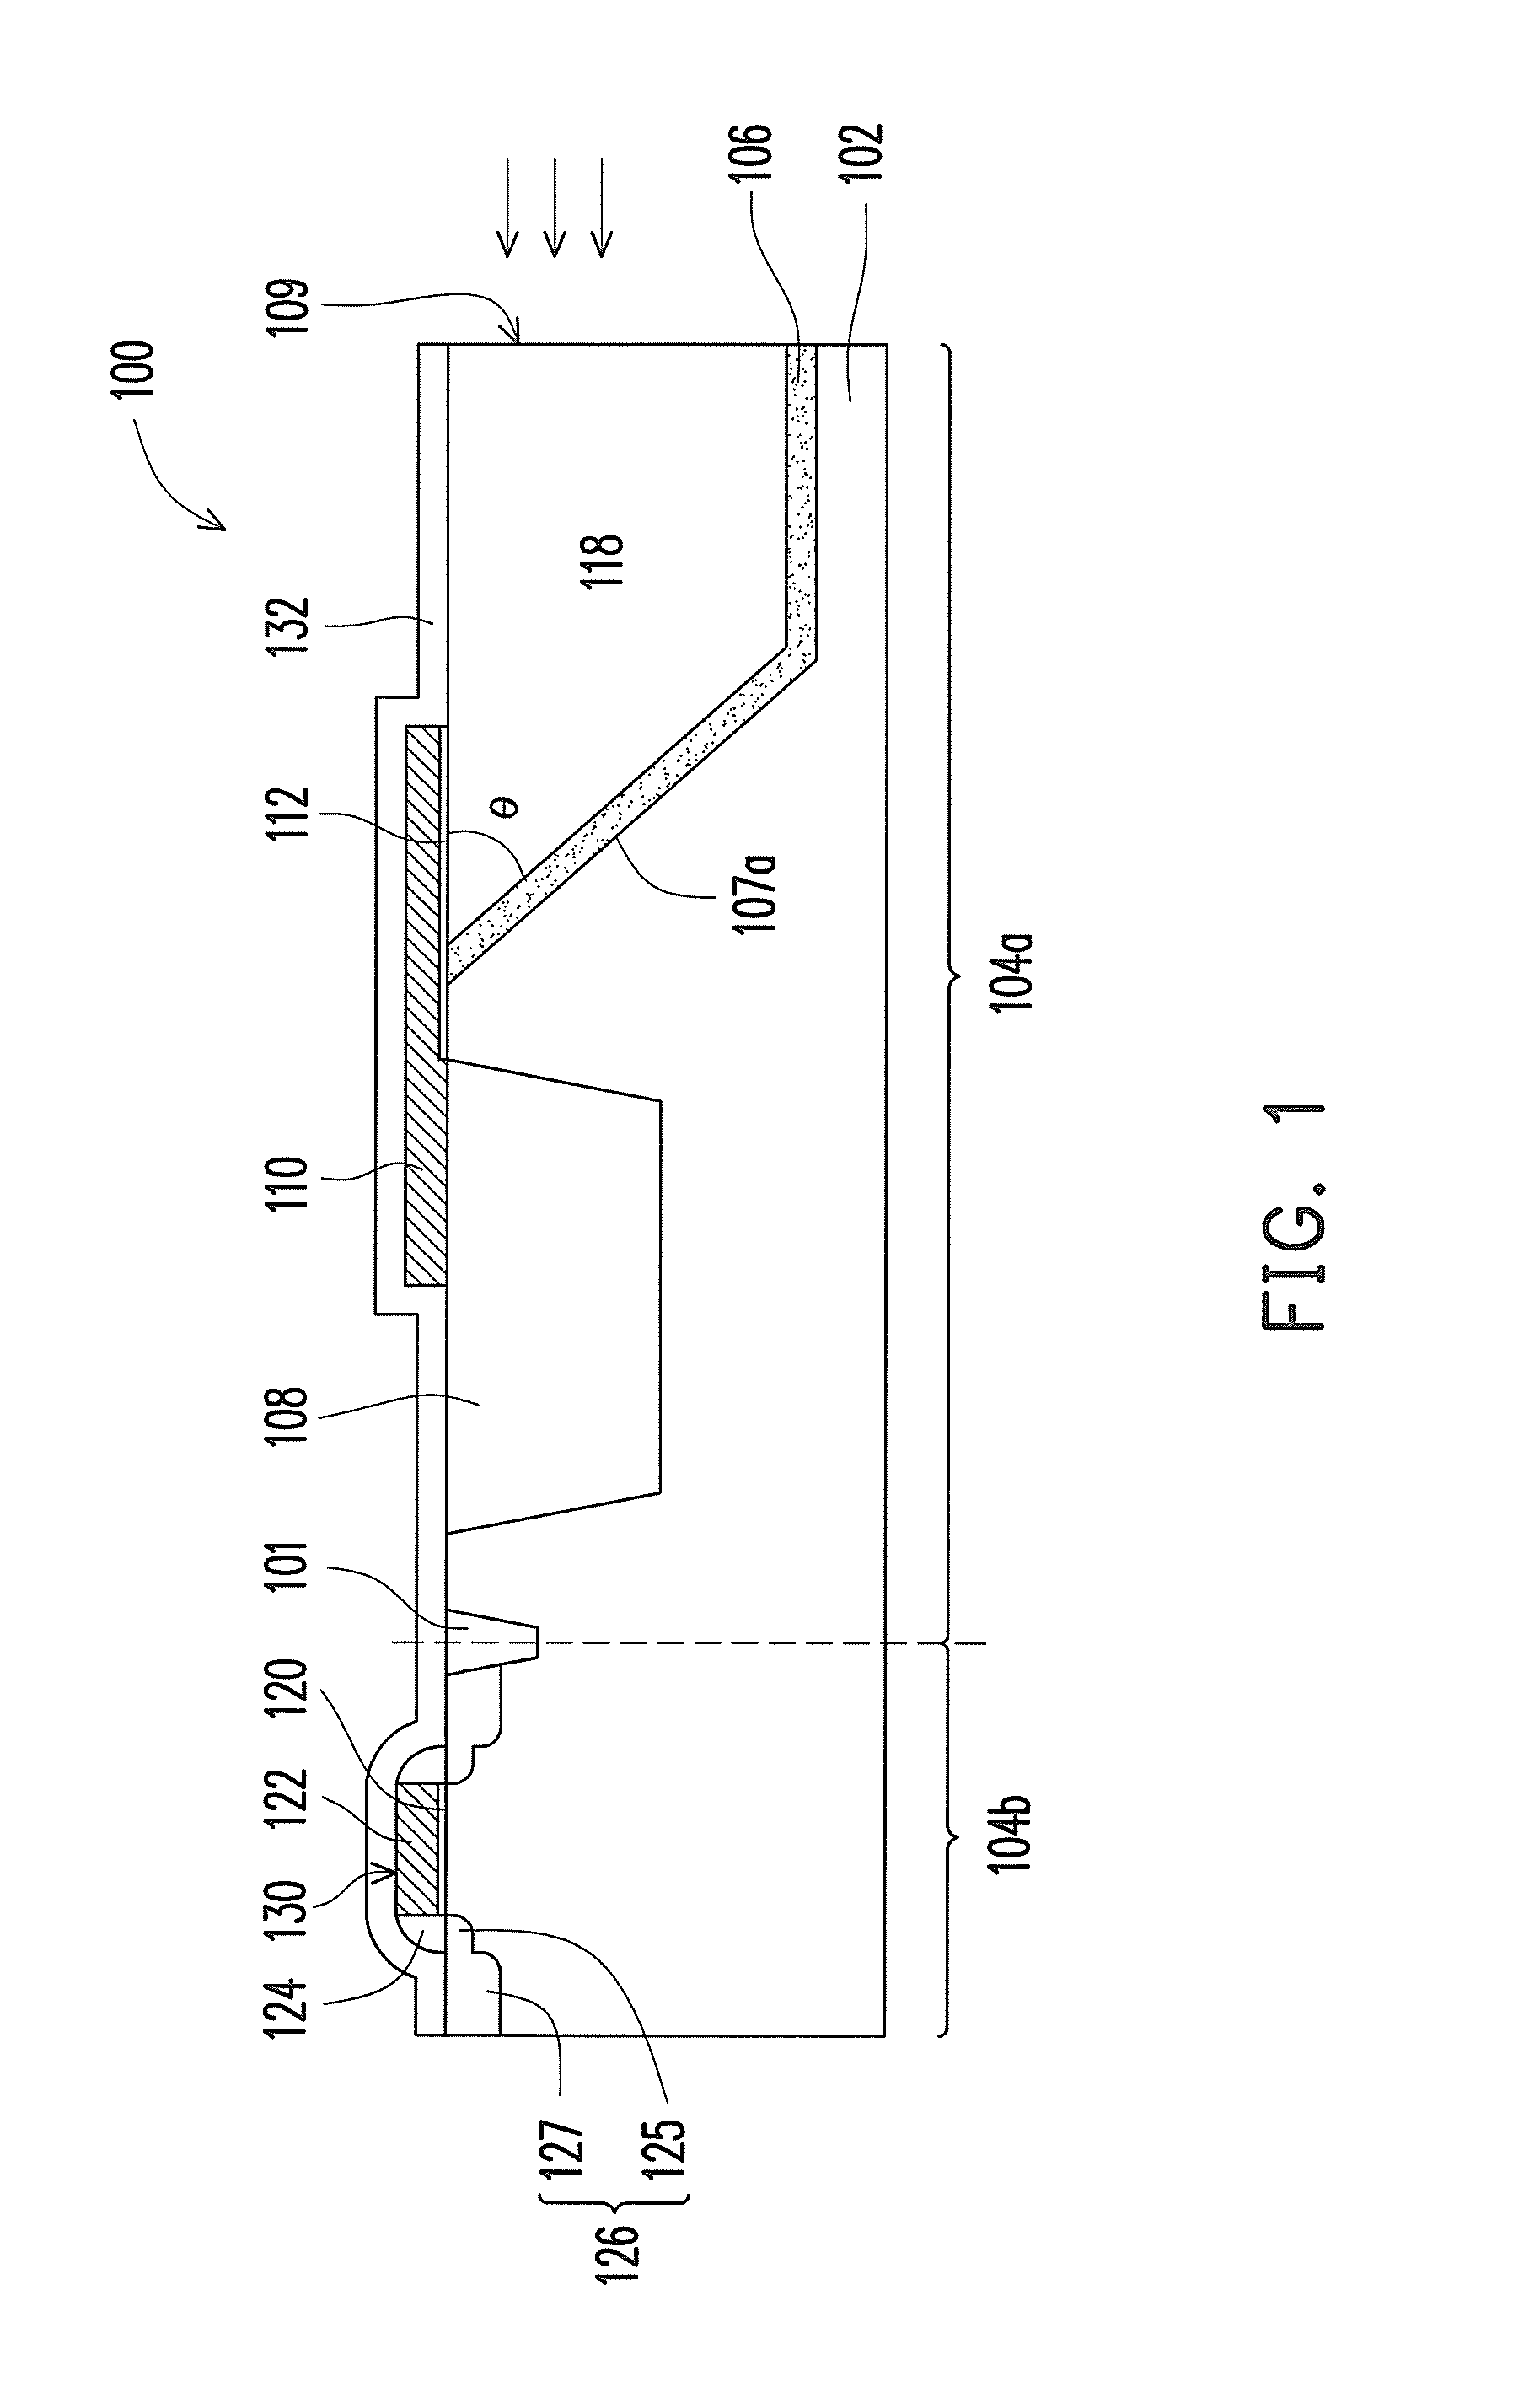 Optoelectronic device and method of forming the same